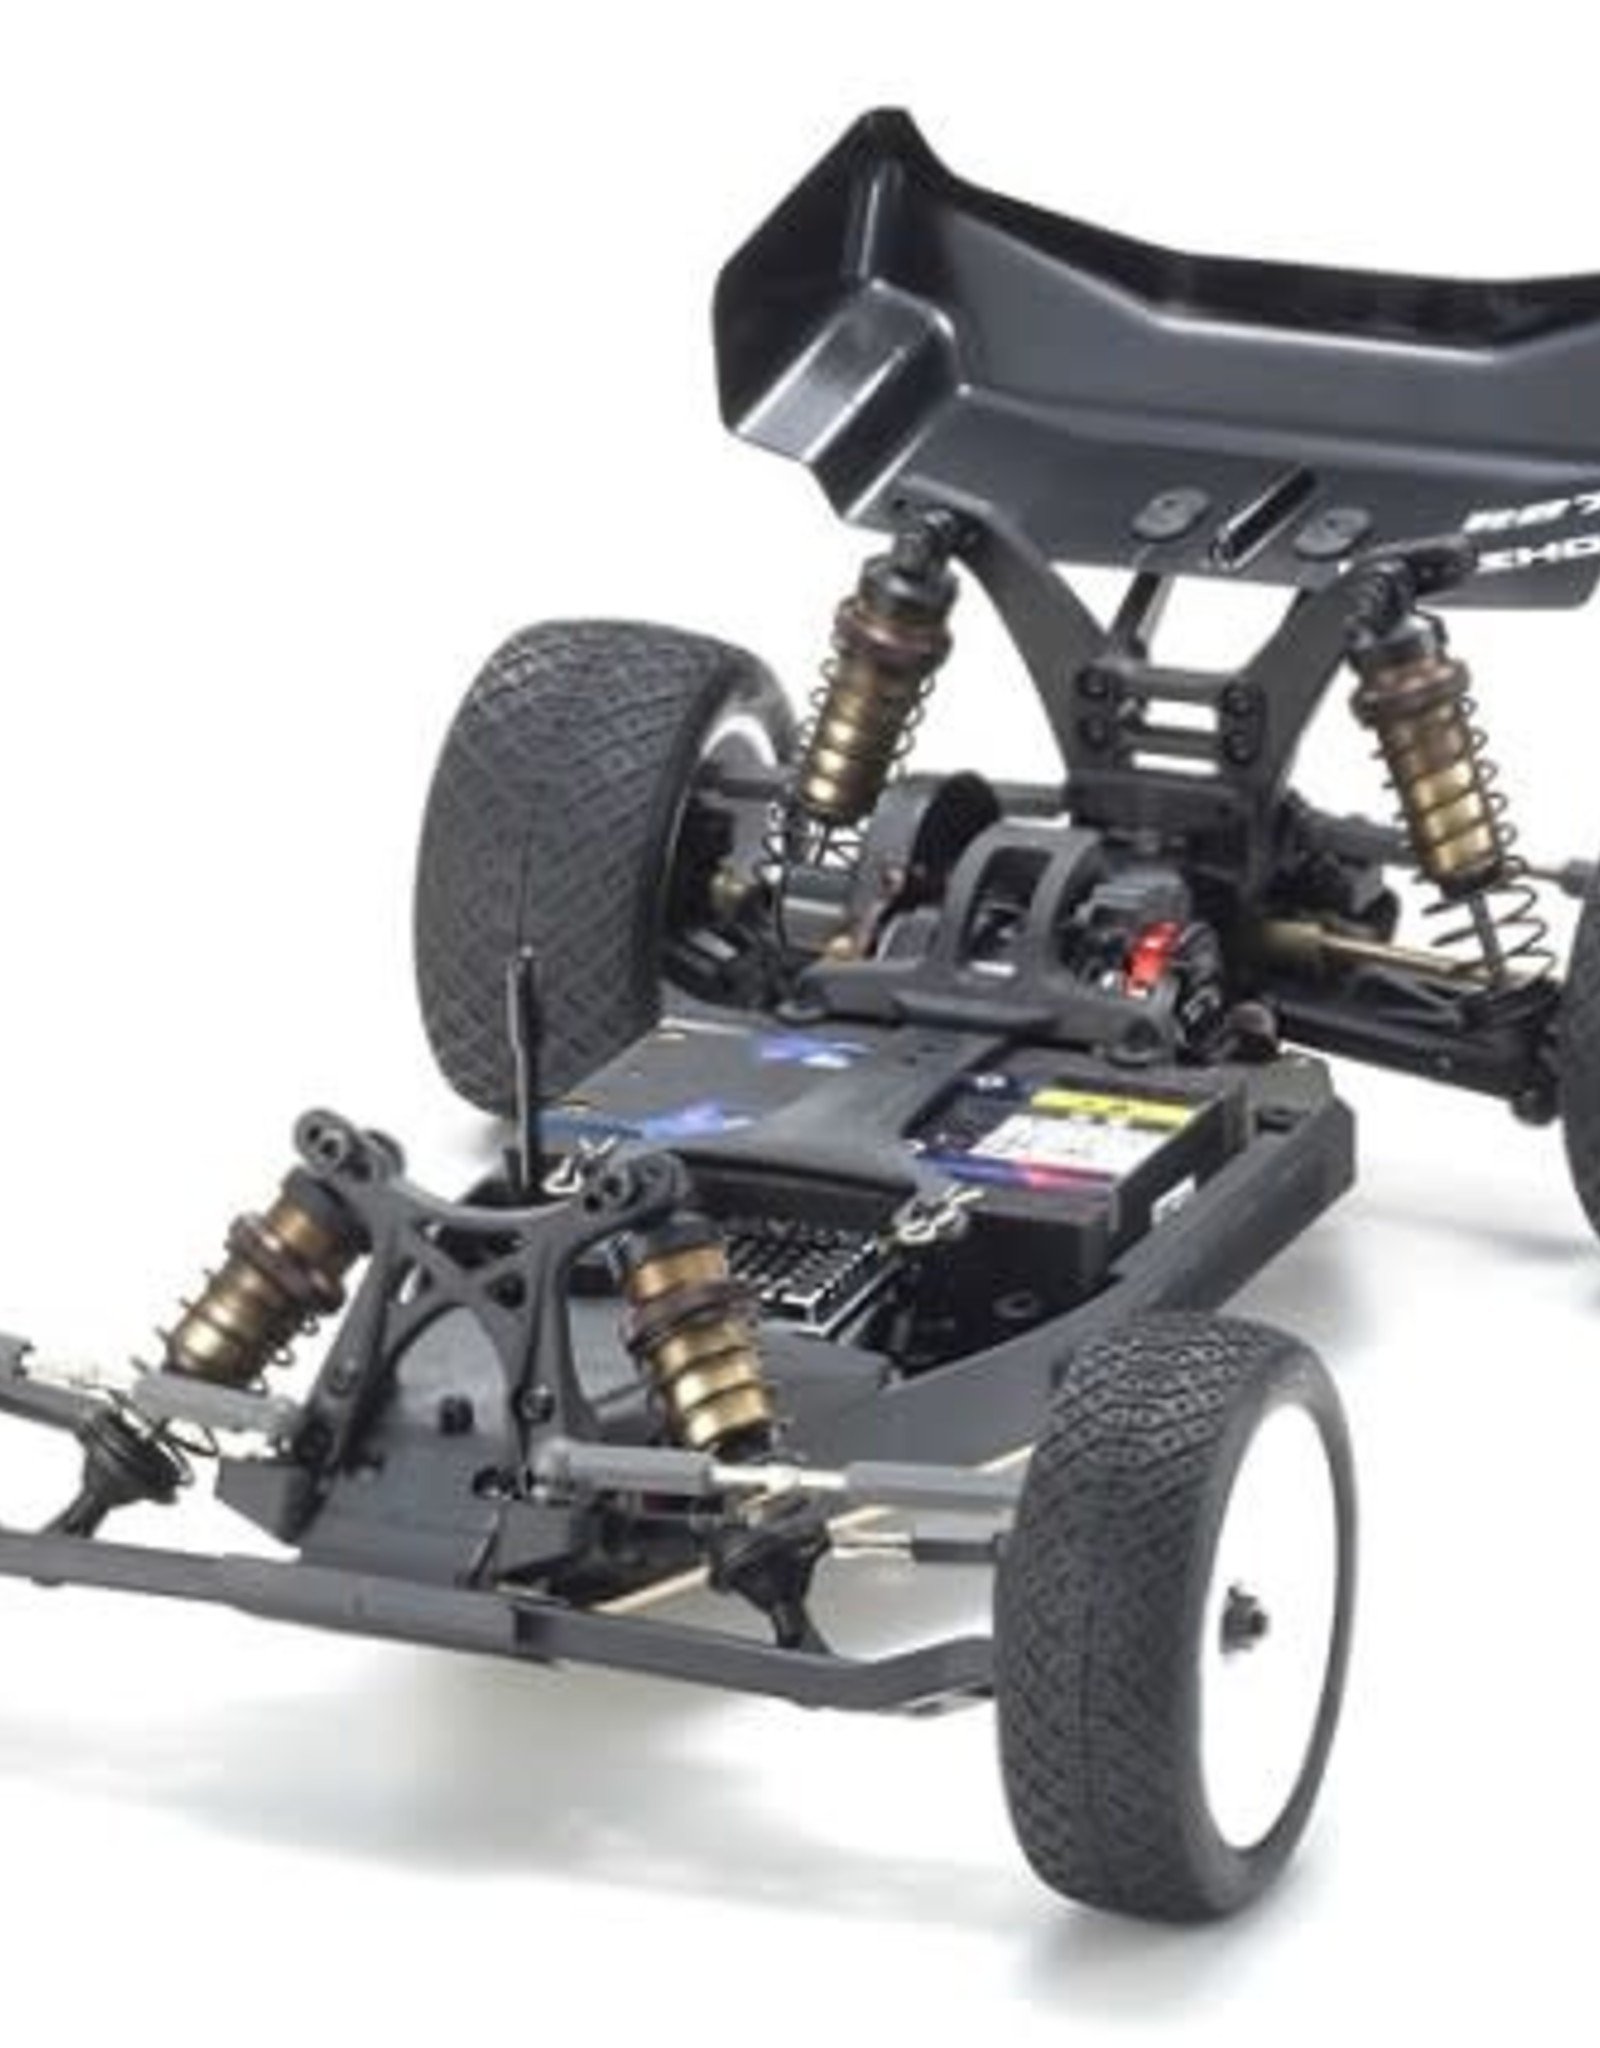 KYOSHO KYO34304 ULTIMA RB7SS Stock Spec  1/10 Scale Performance Buggy Kit.